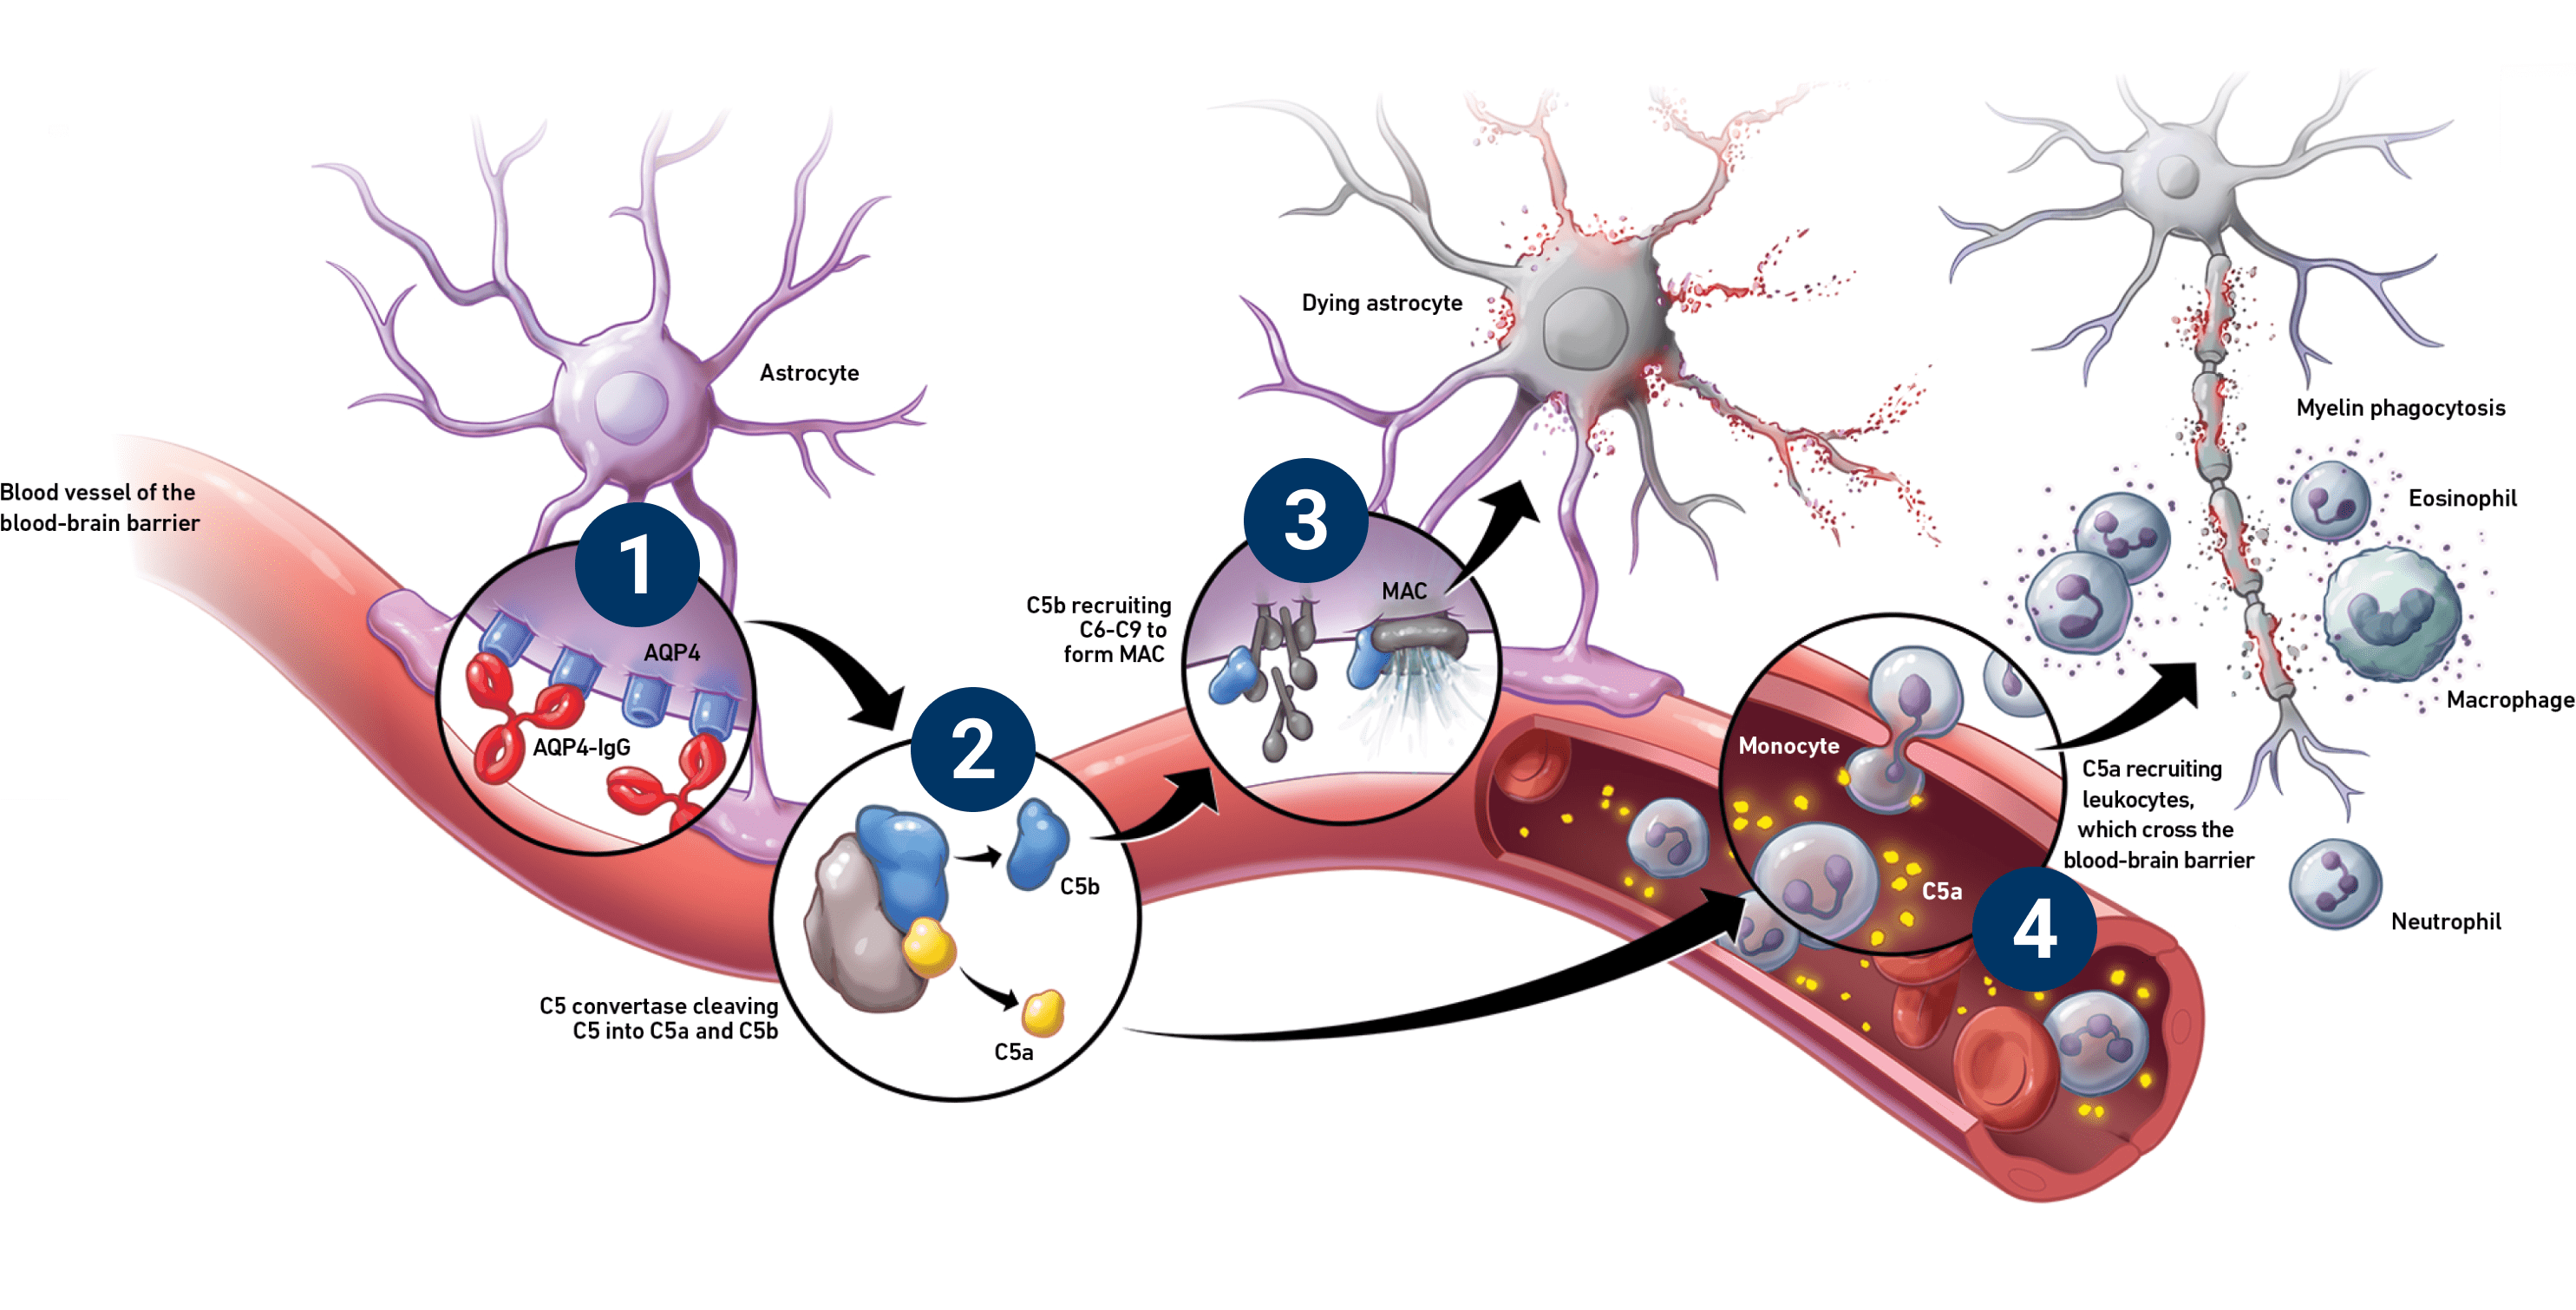 Diagram detailing the four steps through which complement activation can cause damage